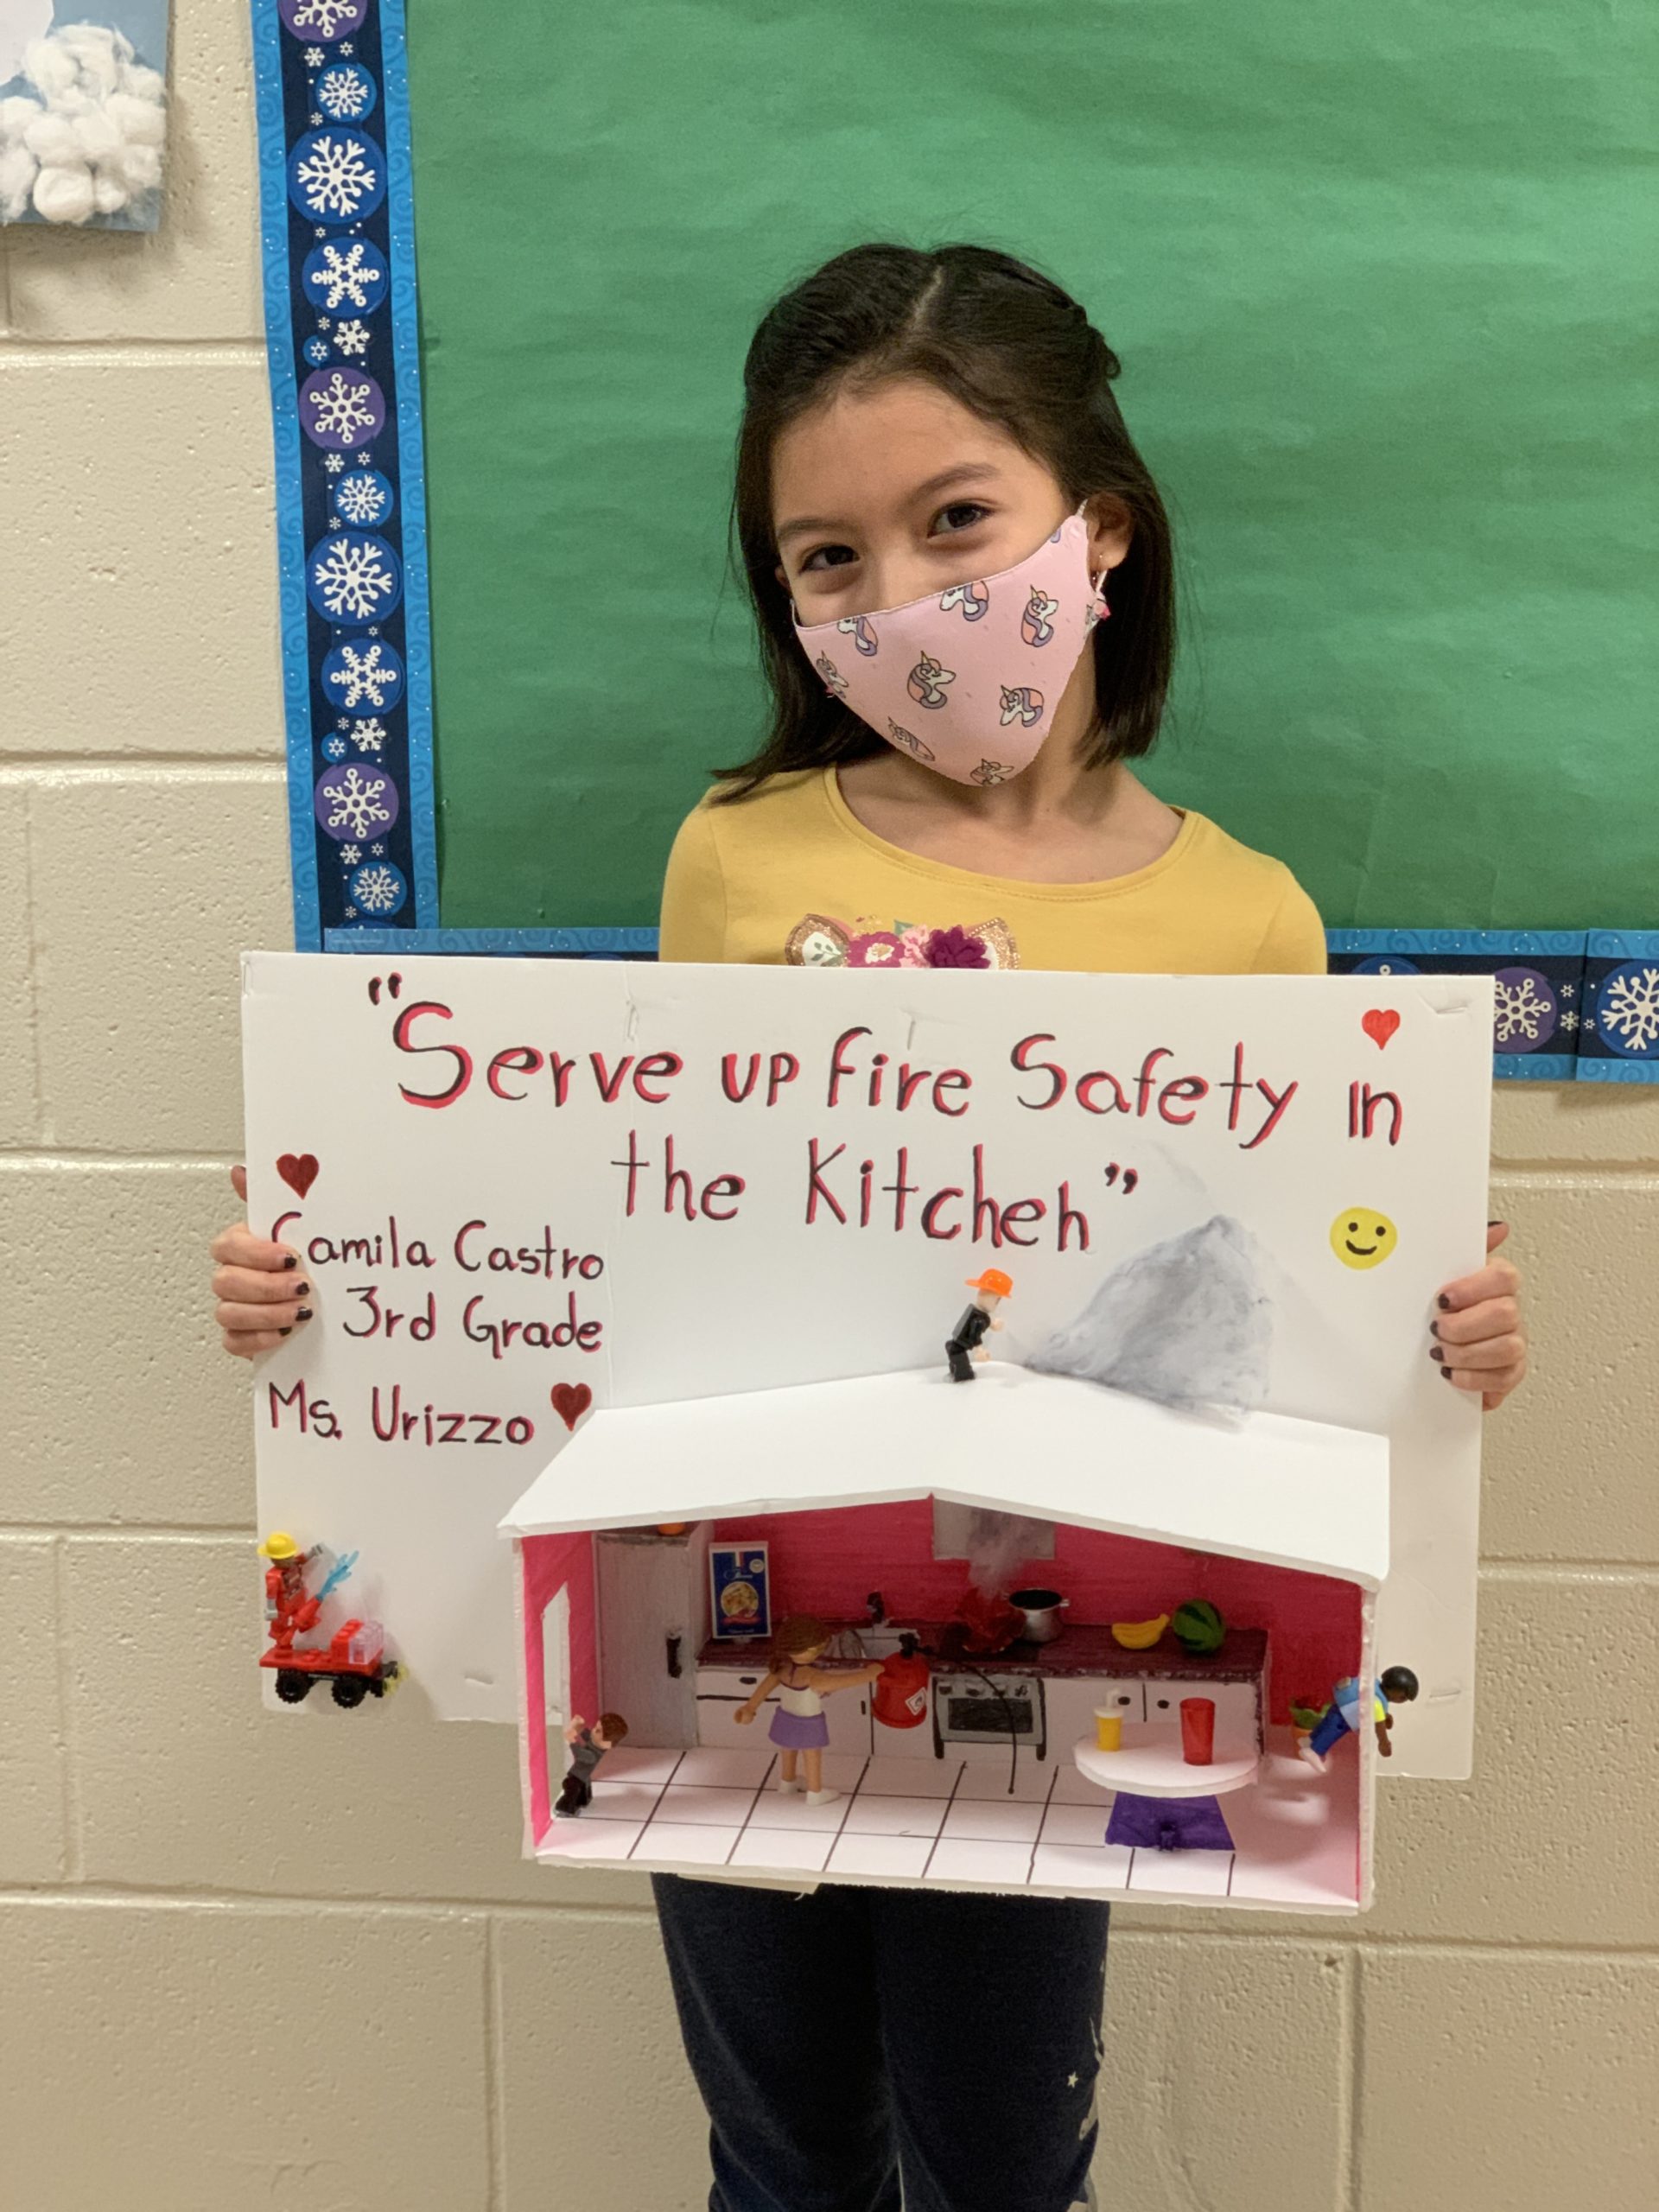 Hampton Bays Elementary School students participated in a “Serve Up Fire Safety in the Kitchen” poster contest. 